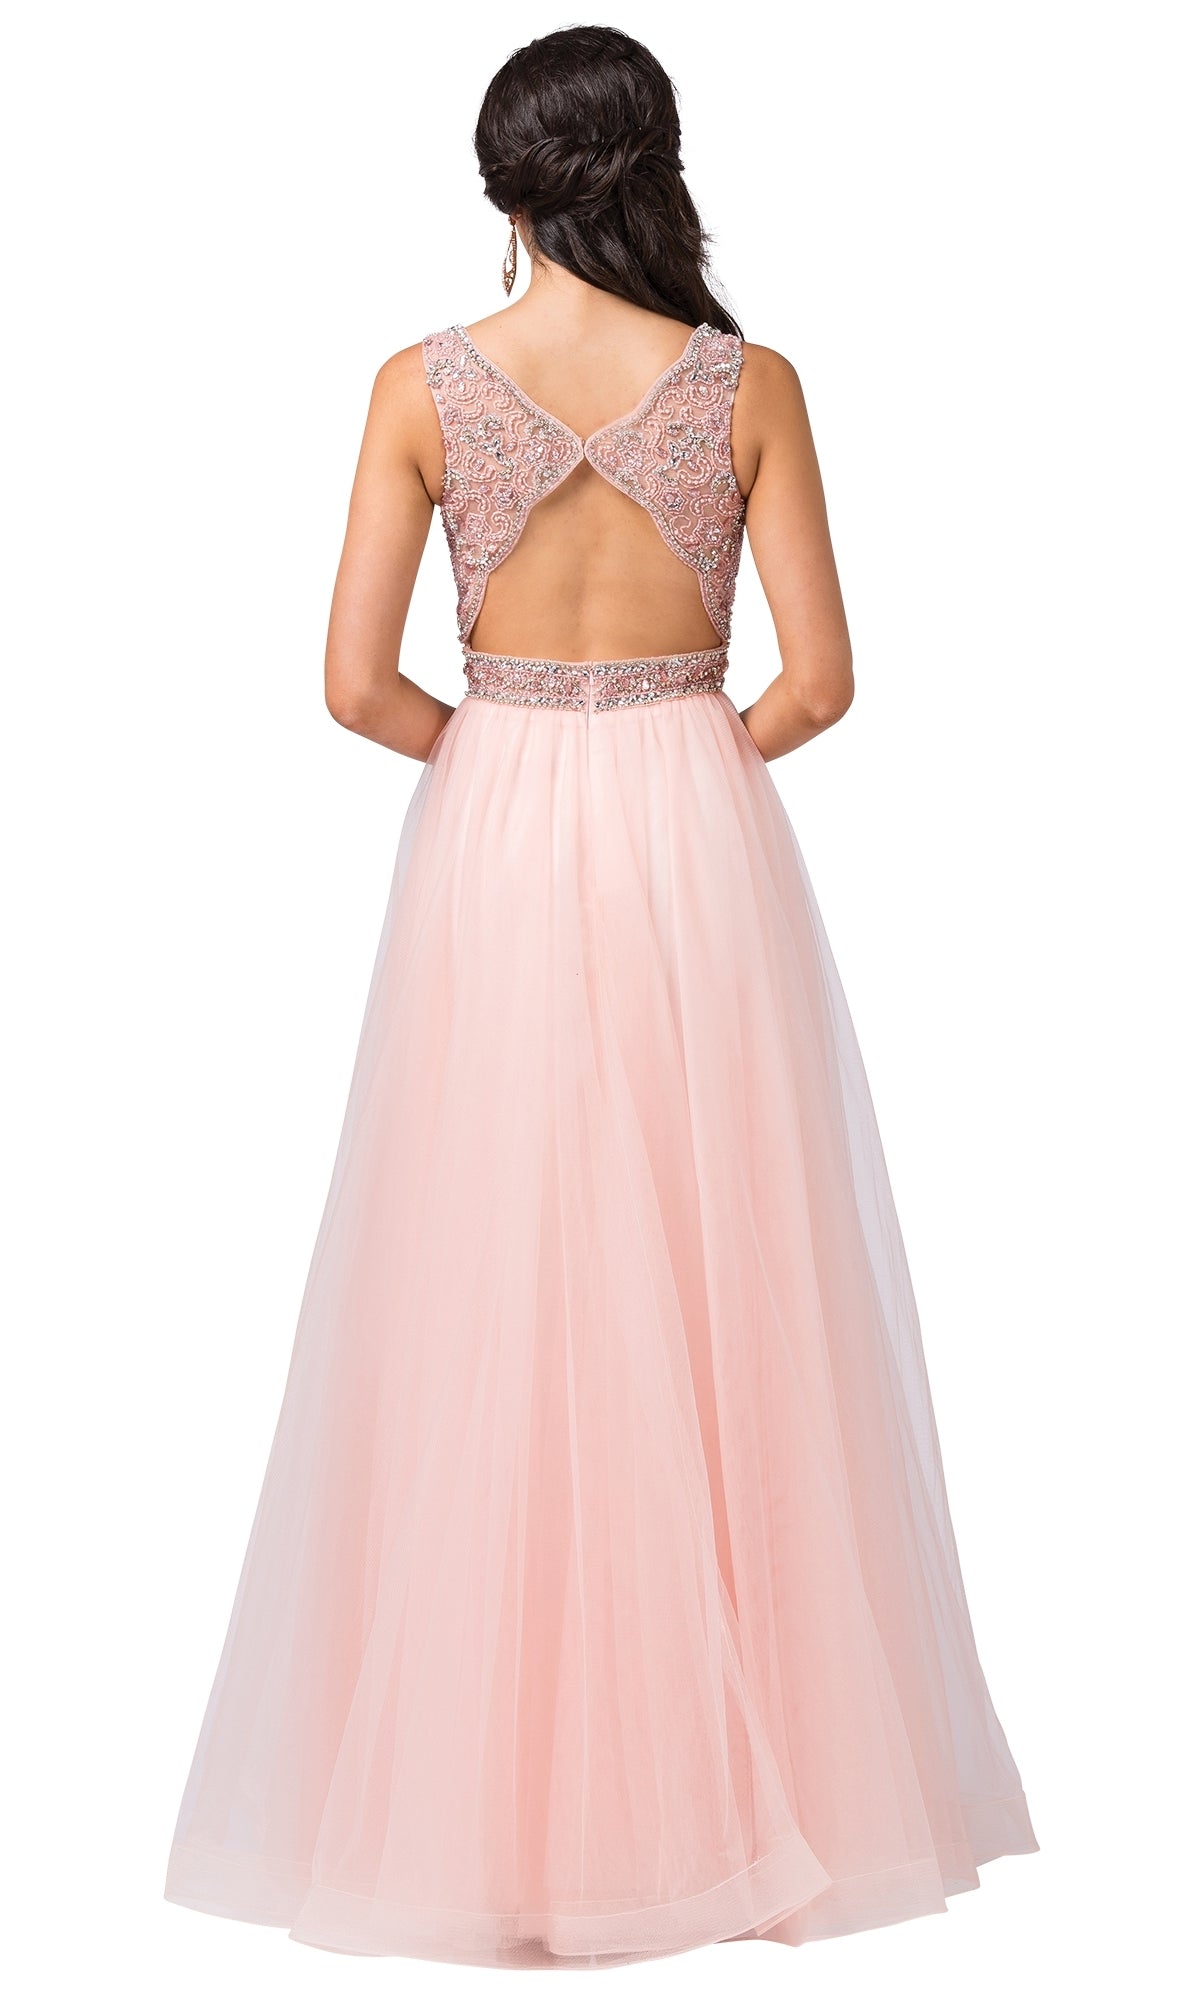  Formal Ball Gown with Embellished Sheer Bodice